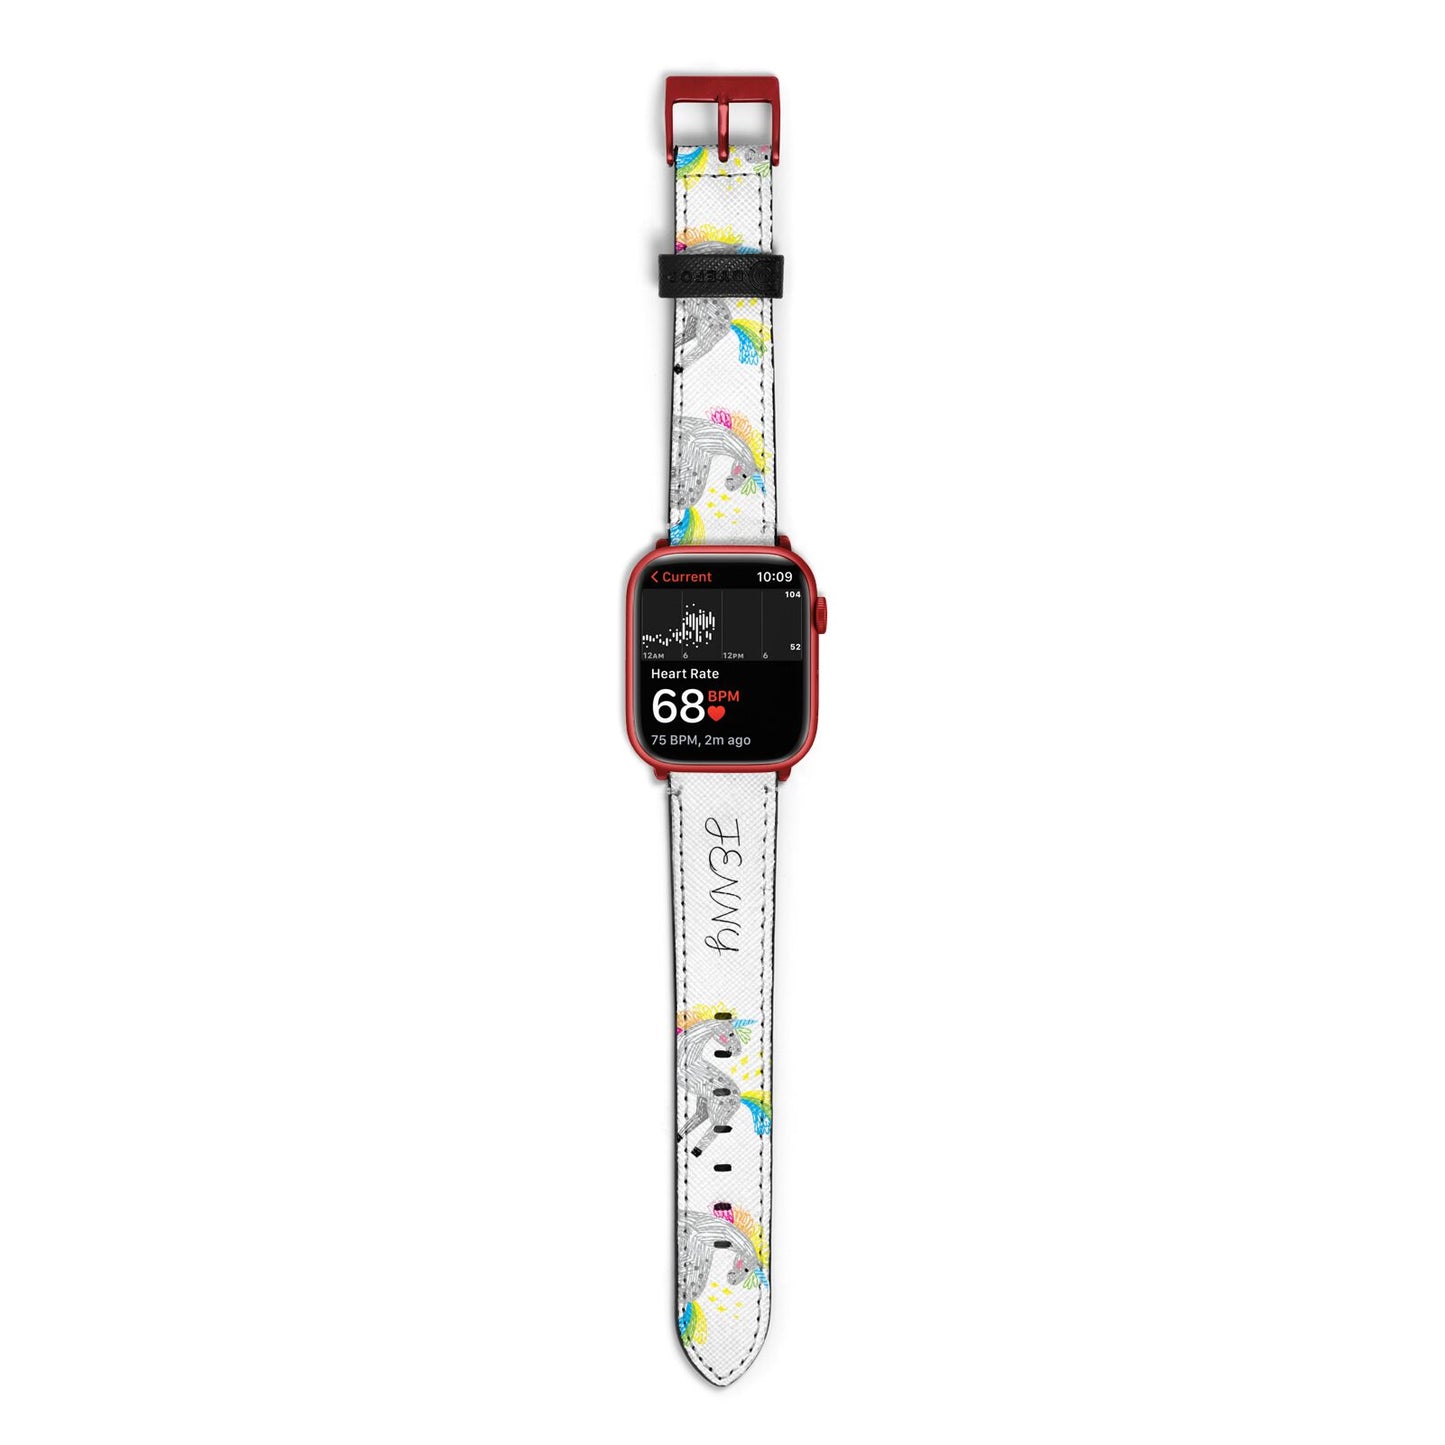 Custom Unicorn Apple Watch Strap Size 38mm with Red Hardware